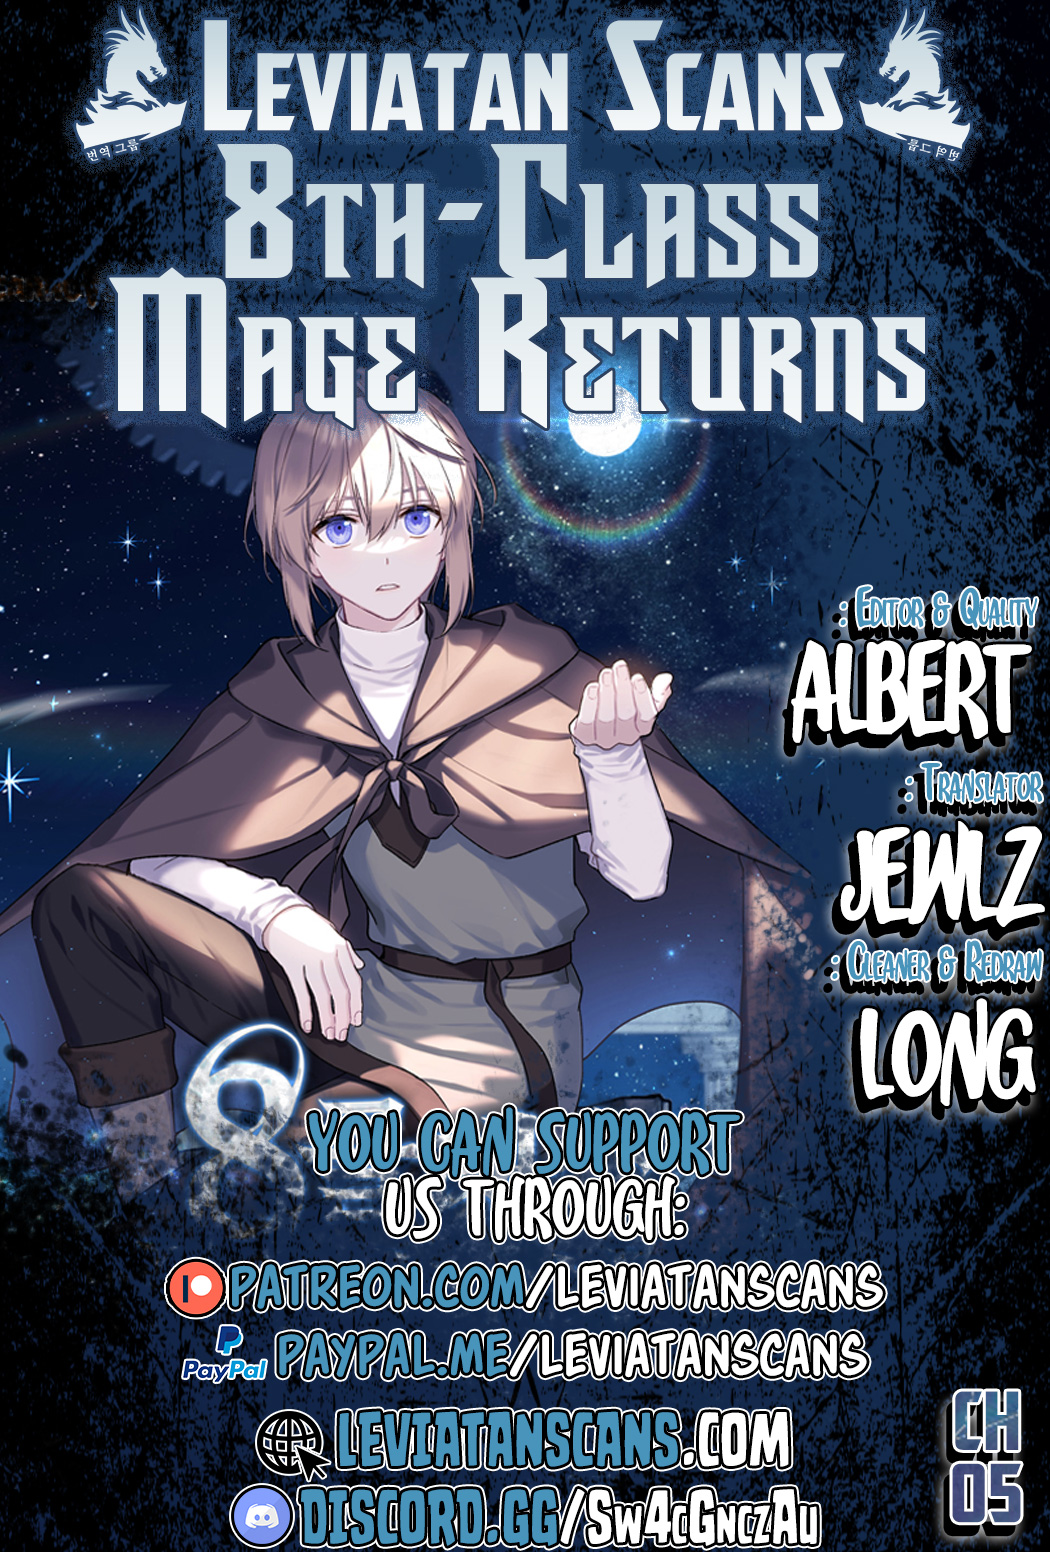 Return of the 8th Class Magician - Chapter 7124 - Image 1